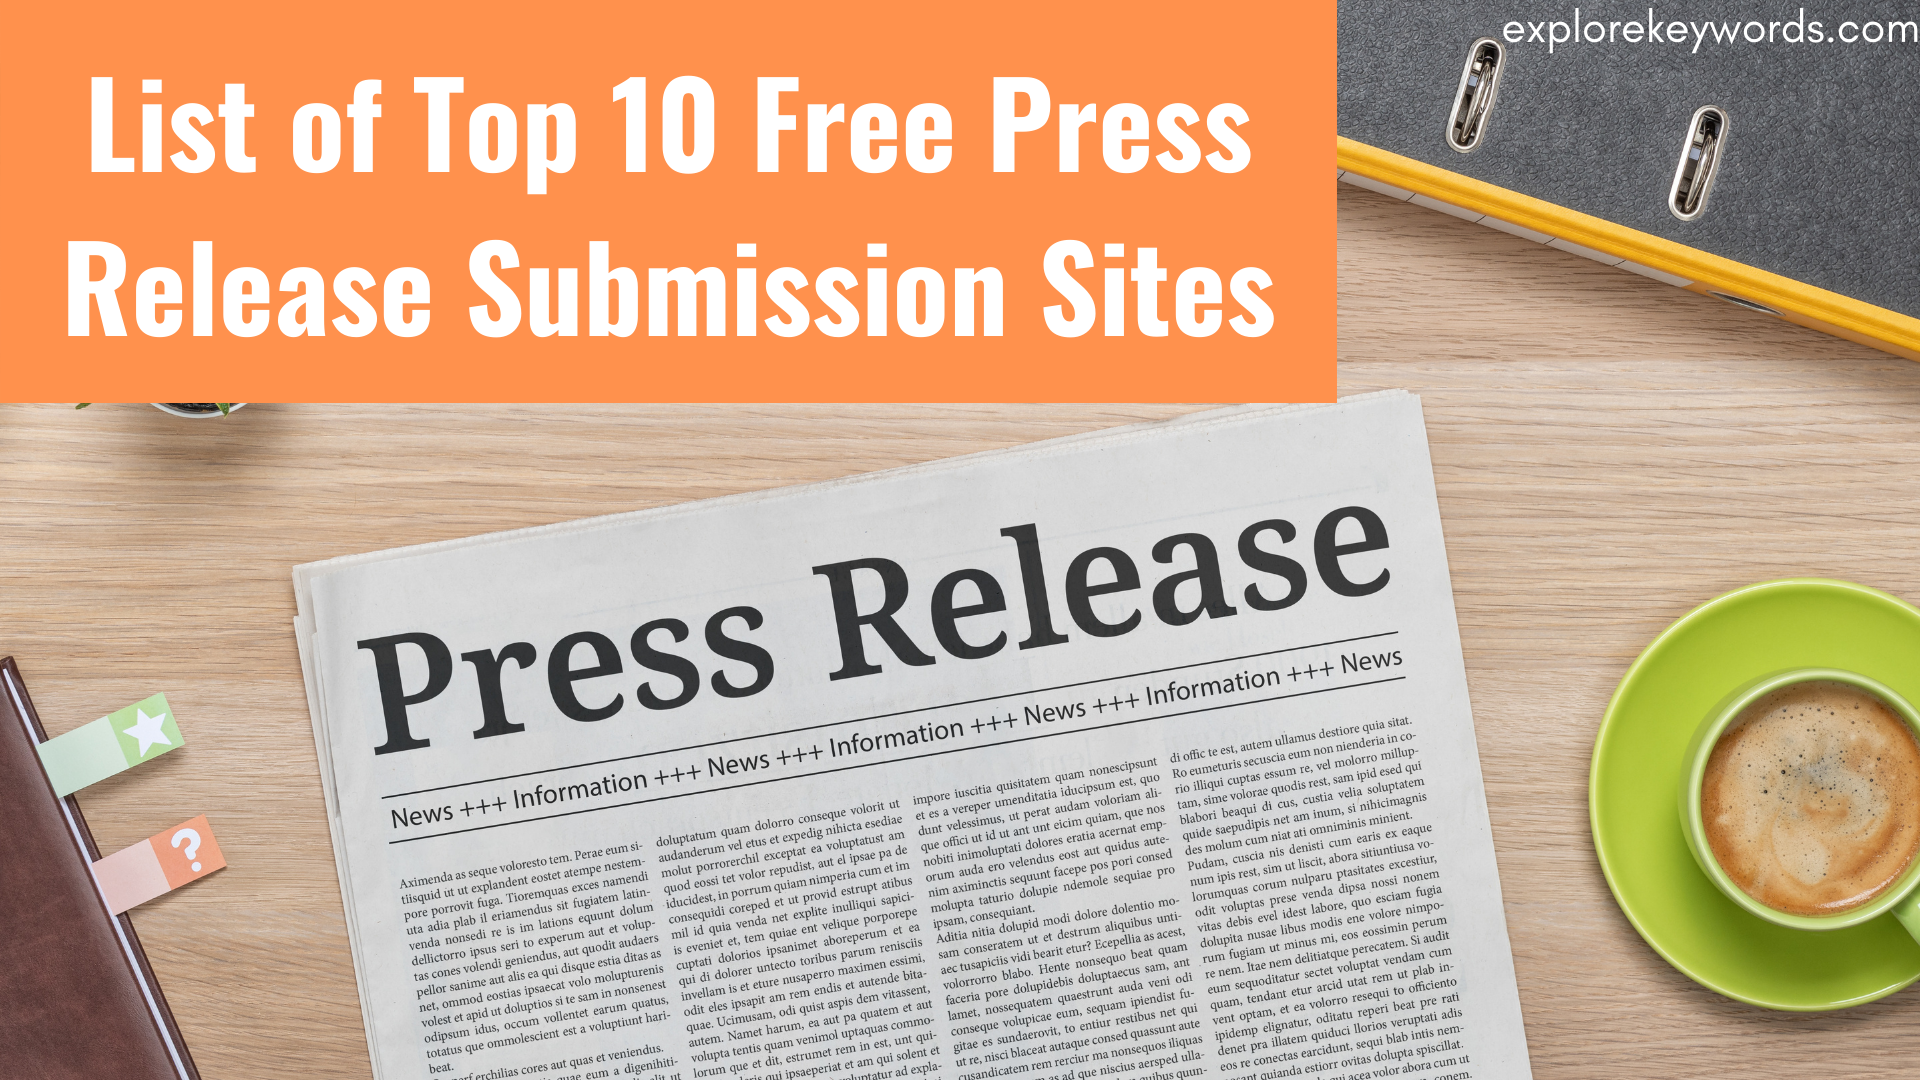 List of Top 10 Free Press Release Submission Sites